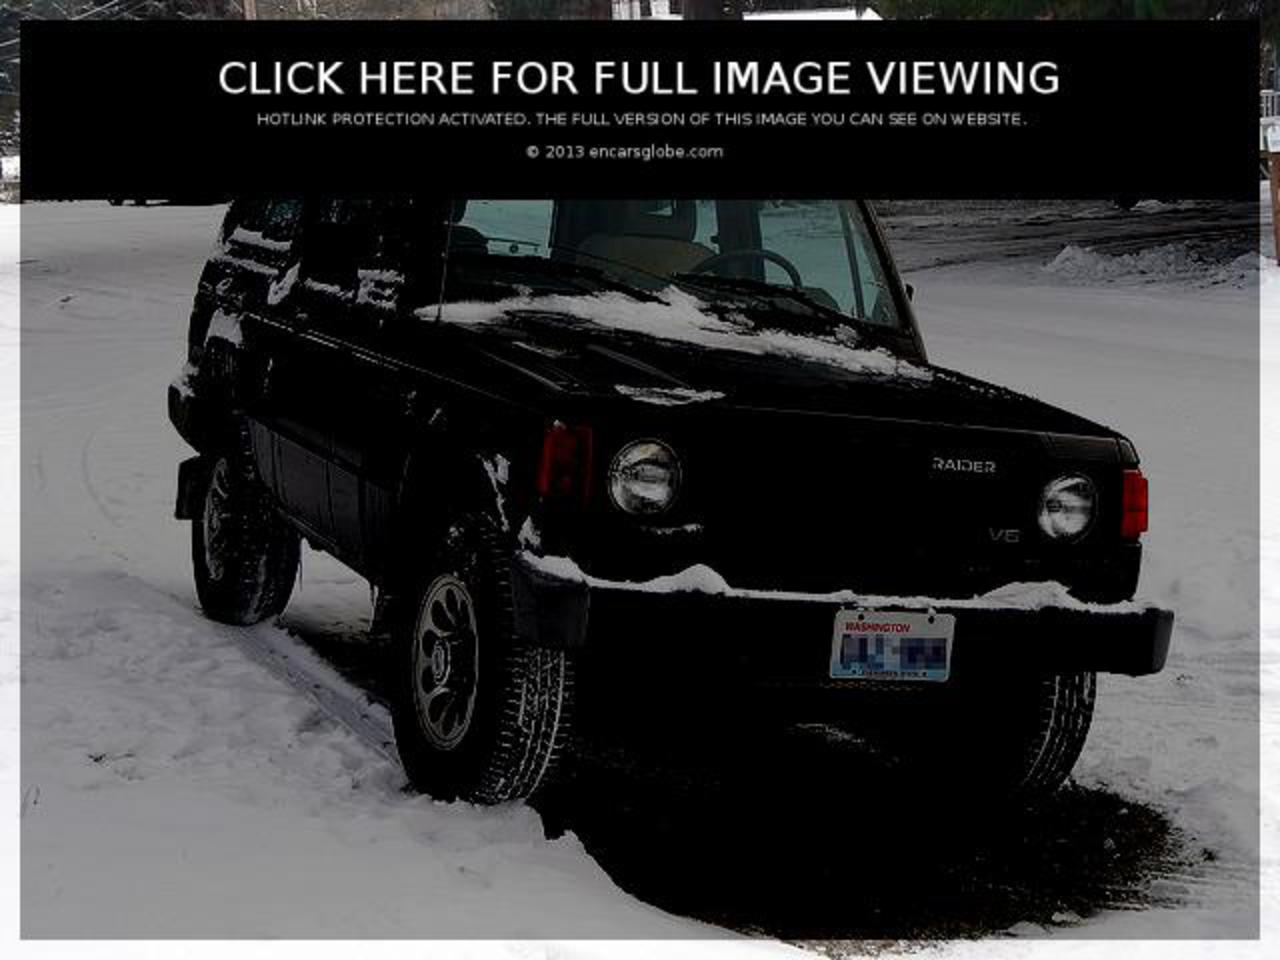 Dodge Raider 4WD Photo Gallery: Photo #01 out of 5, Image Size ...